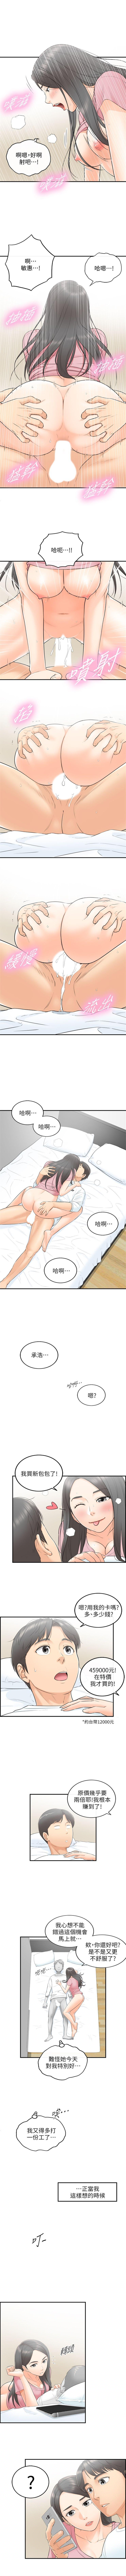 Chica 正妹小主管 1-54 官方中文（連載中） Spread - Page 7